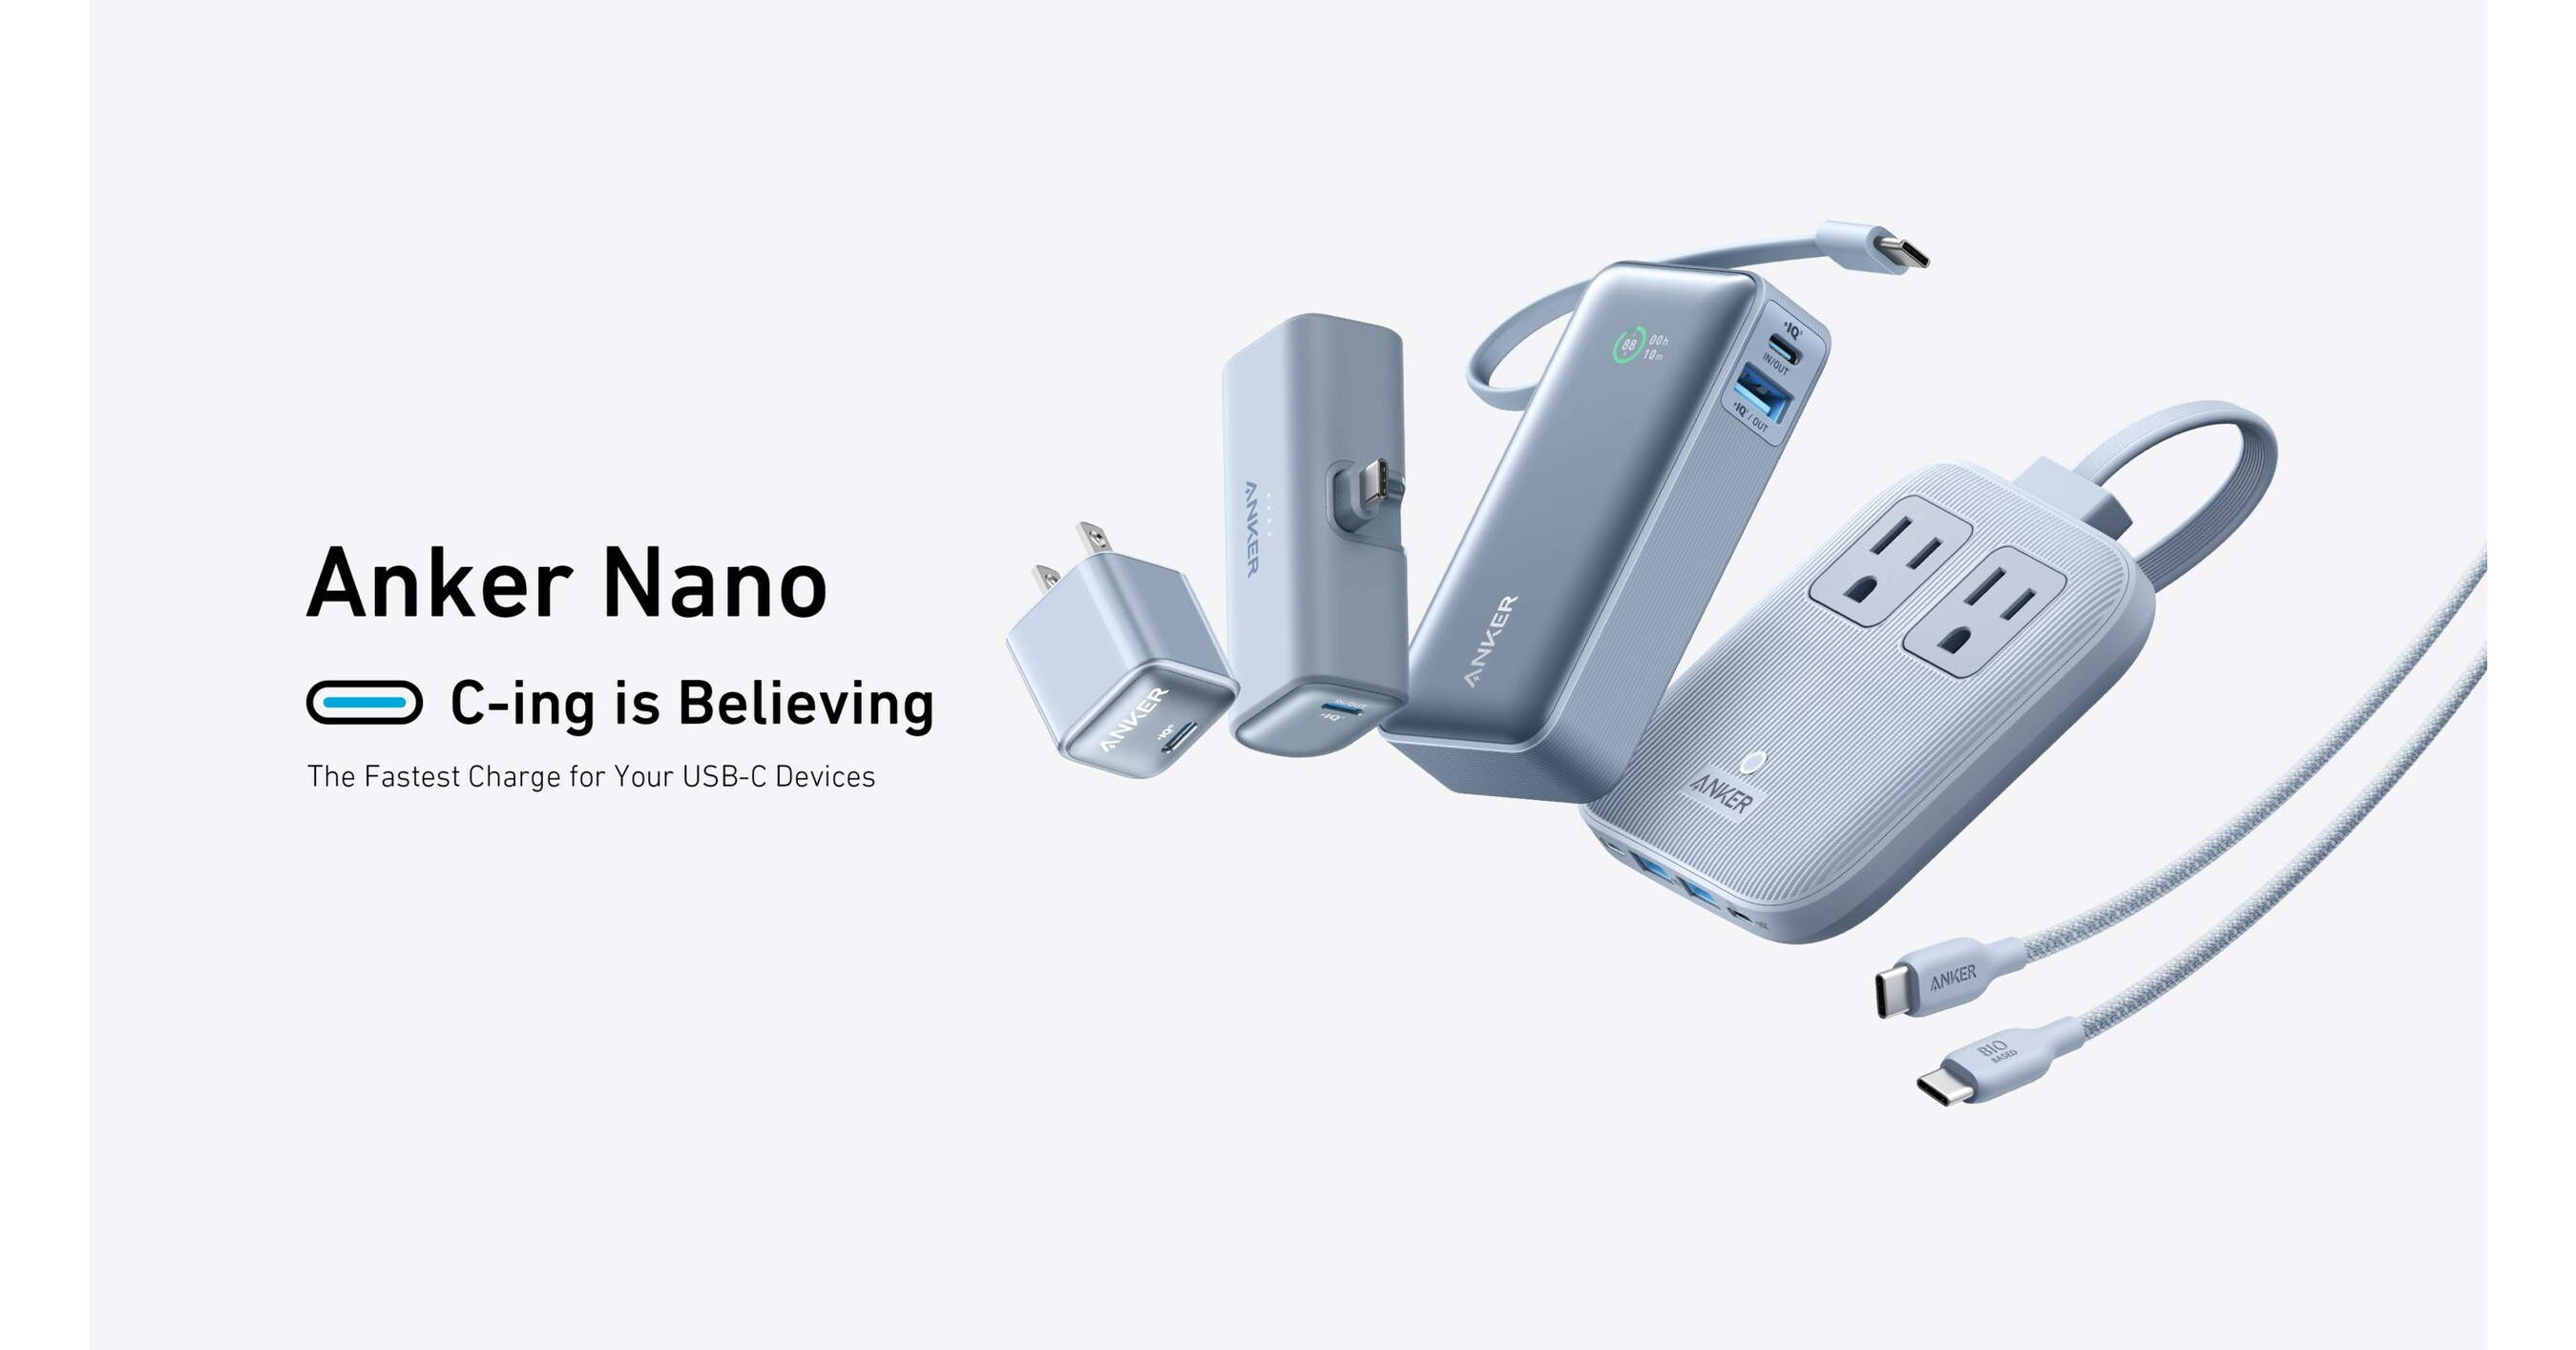 Anker's Latest Nano Series of Charging Accessories are Colorful, Compact,  and More Compatible Than Ever